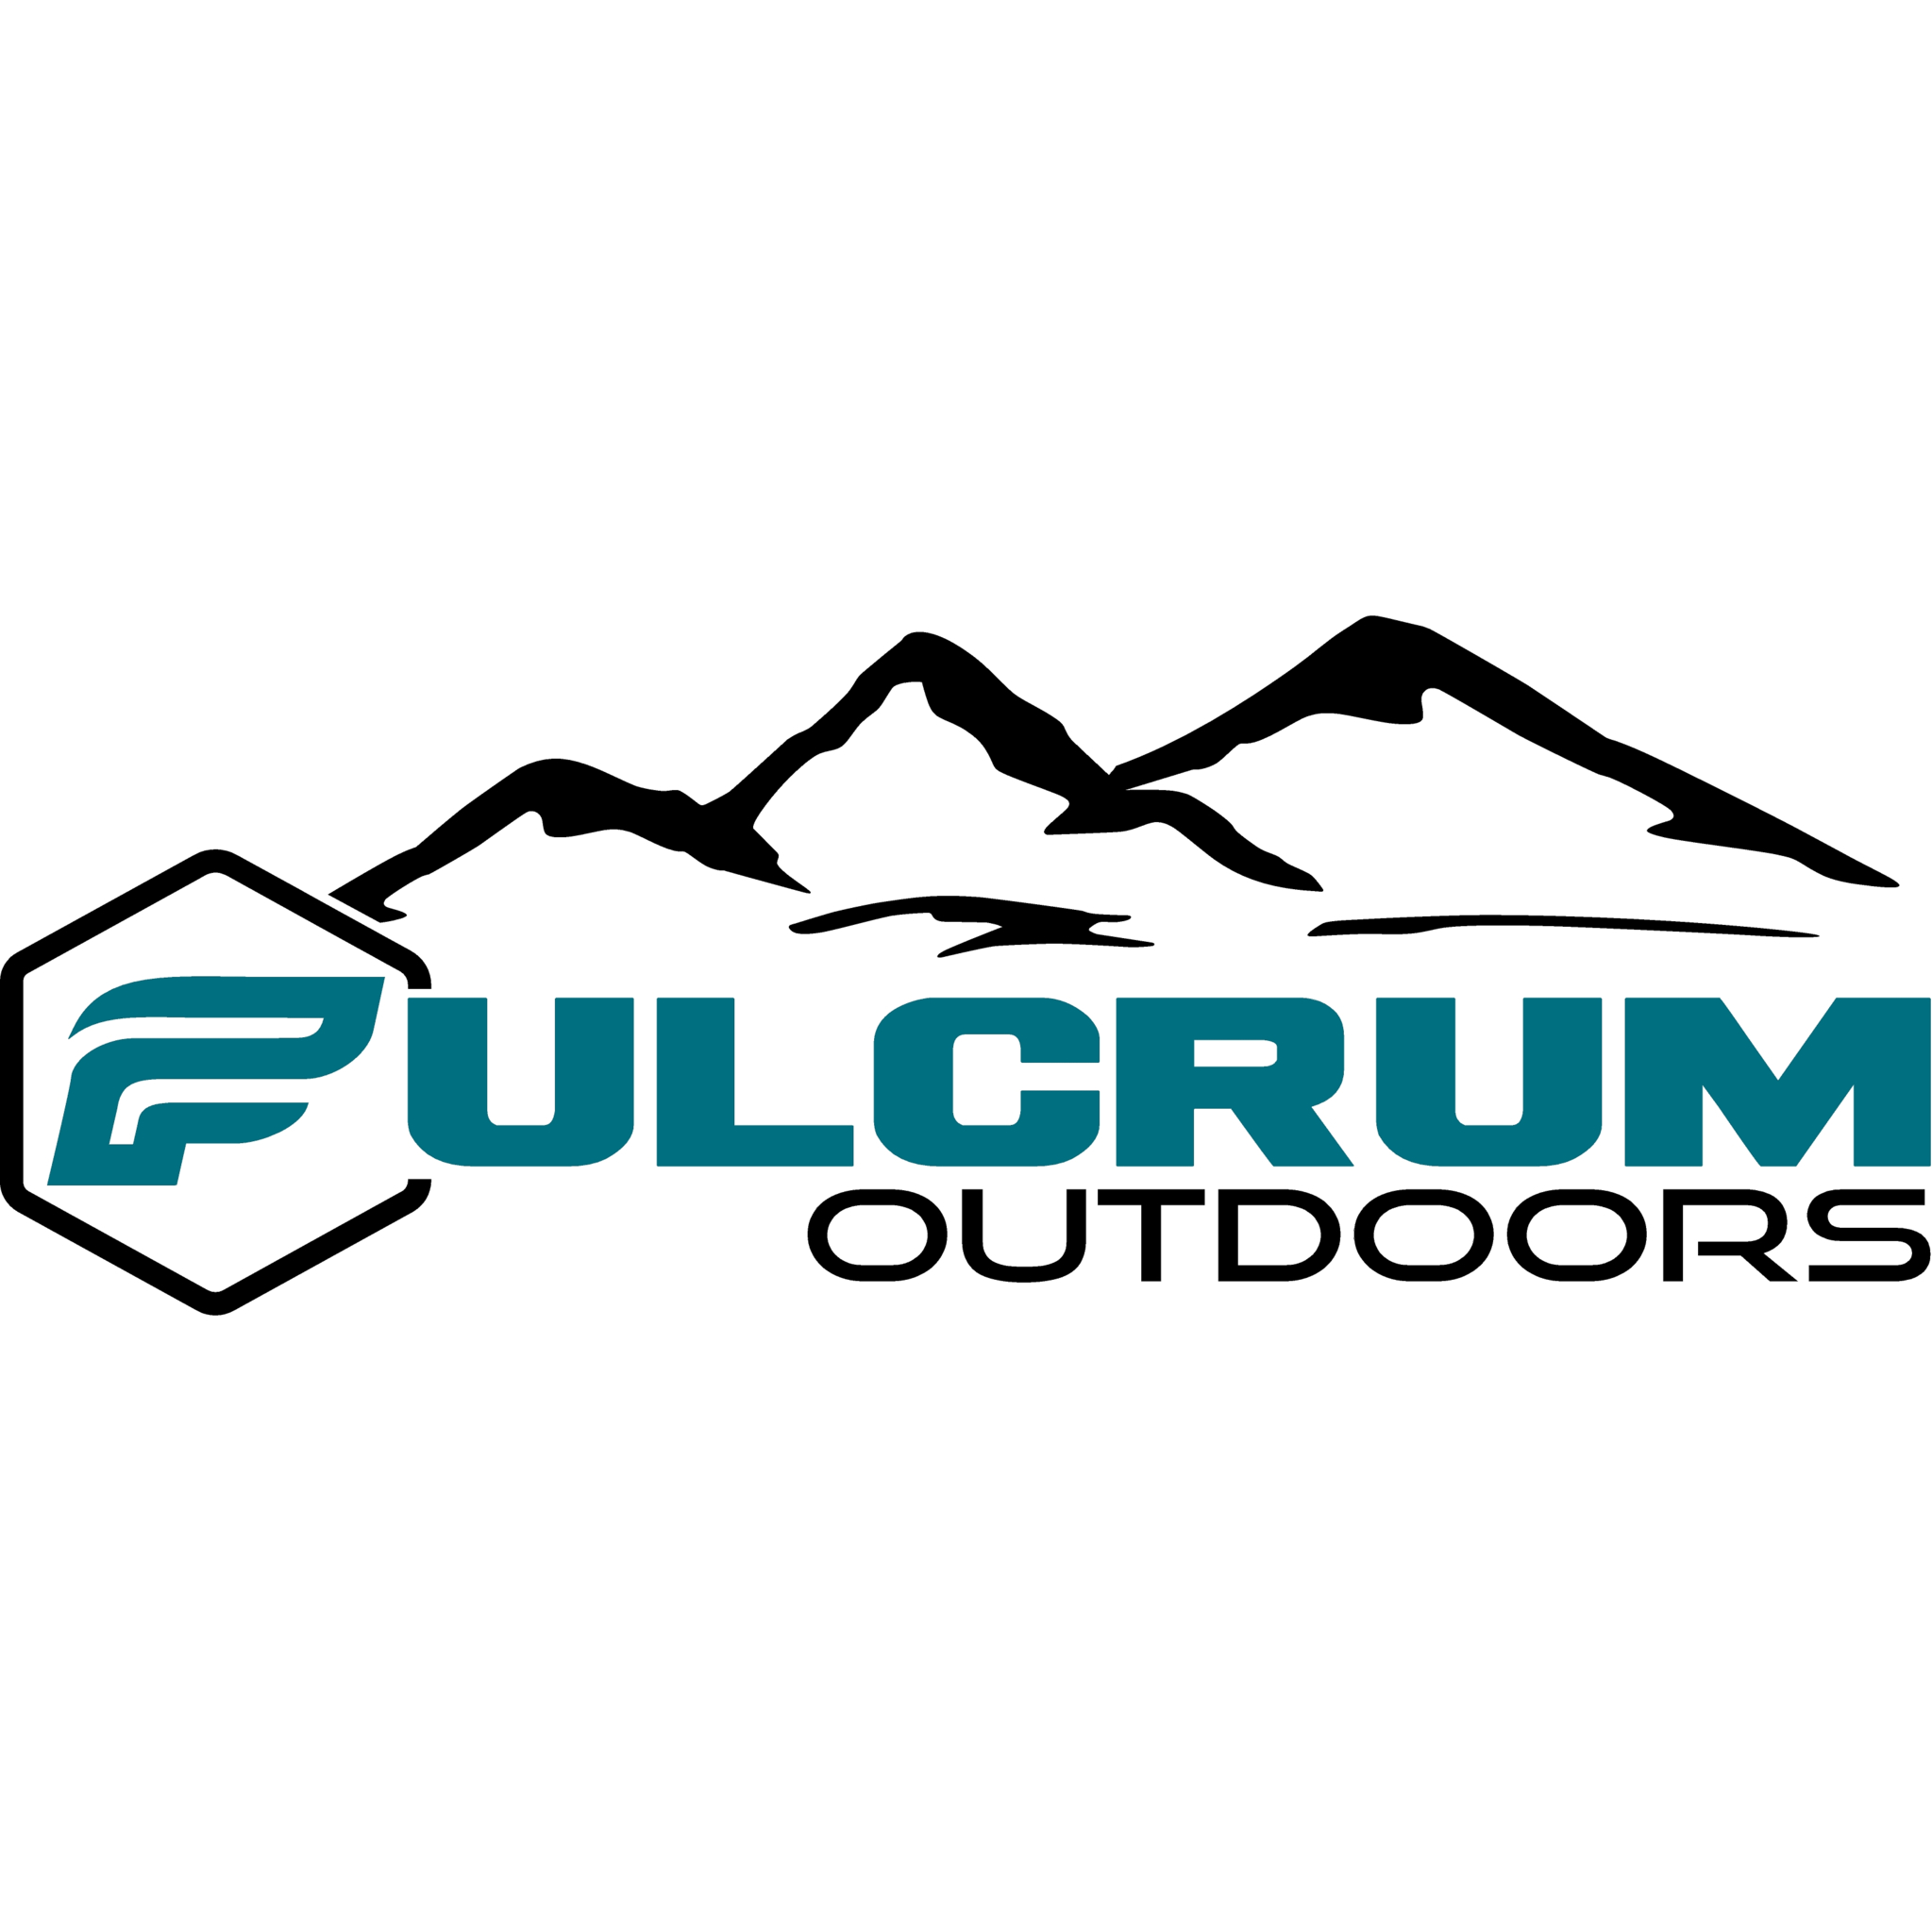 Fulcrum Outdoors - Sporting Goods Stores